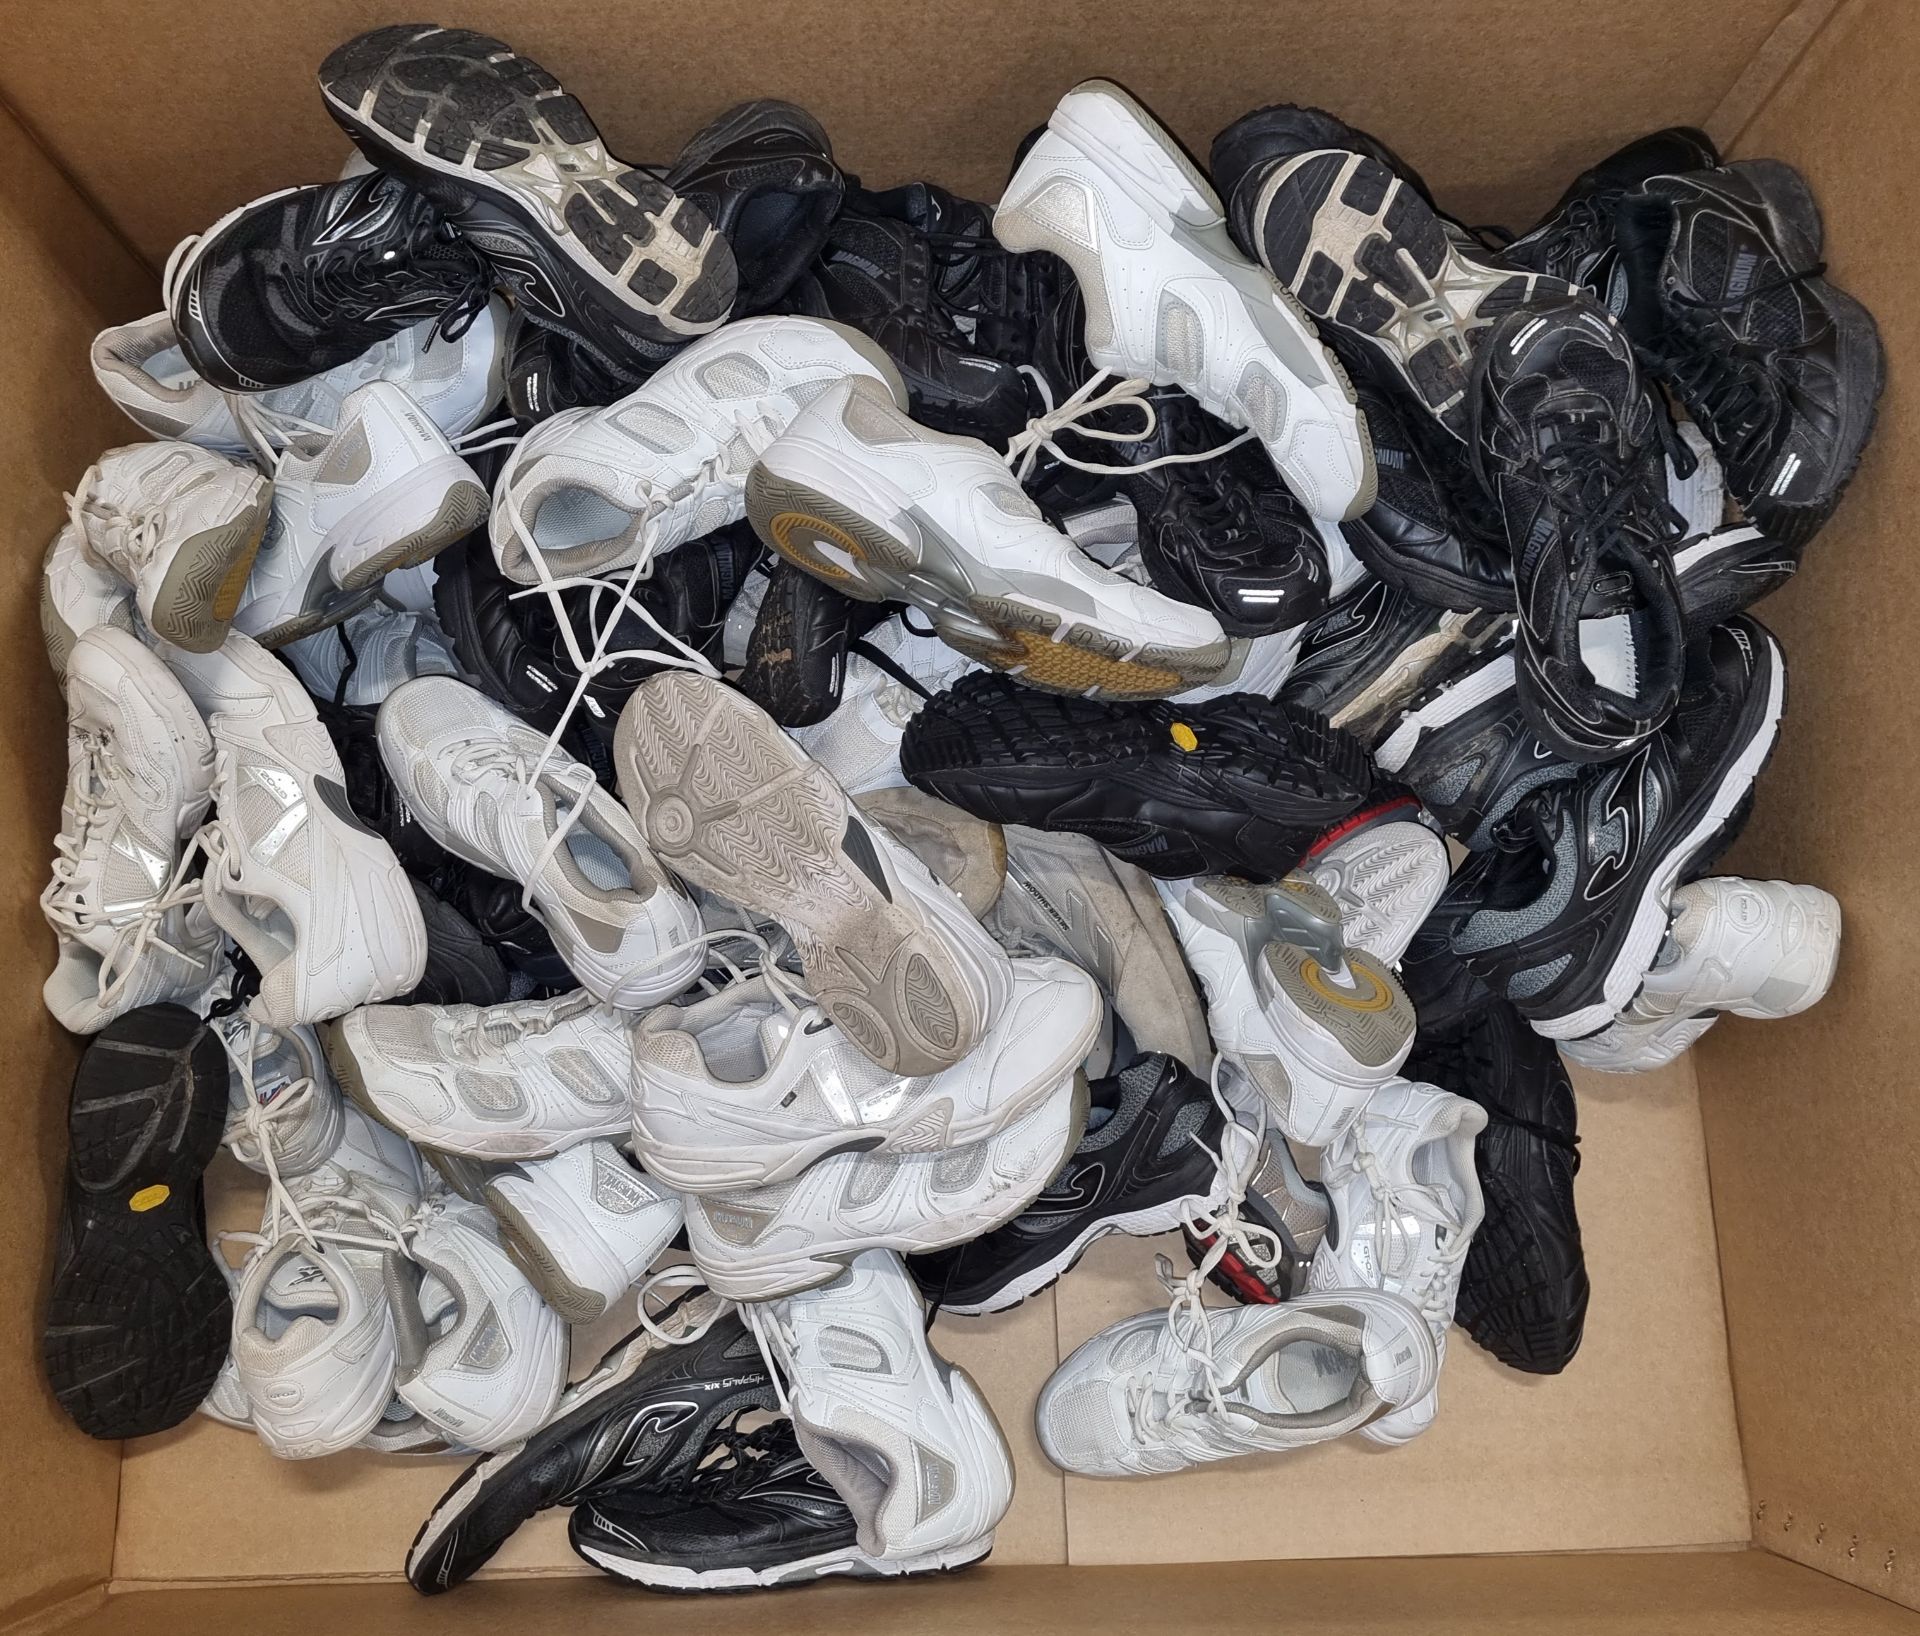 50x pairs of various trainers - different makes & sizes - mixed grades